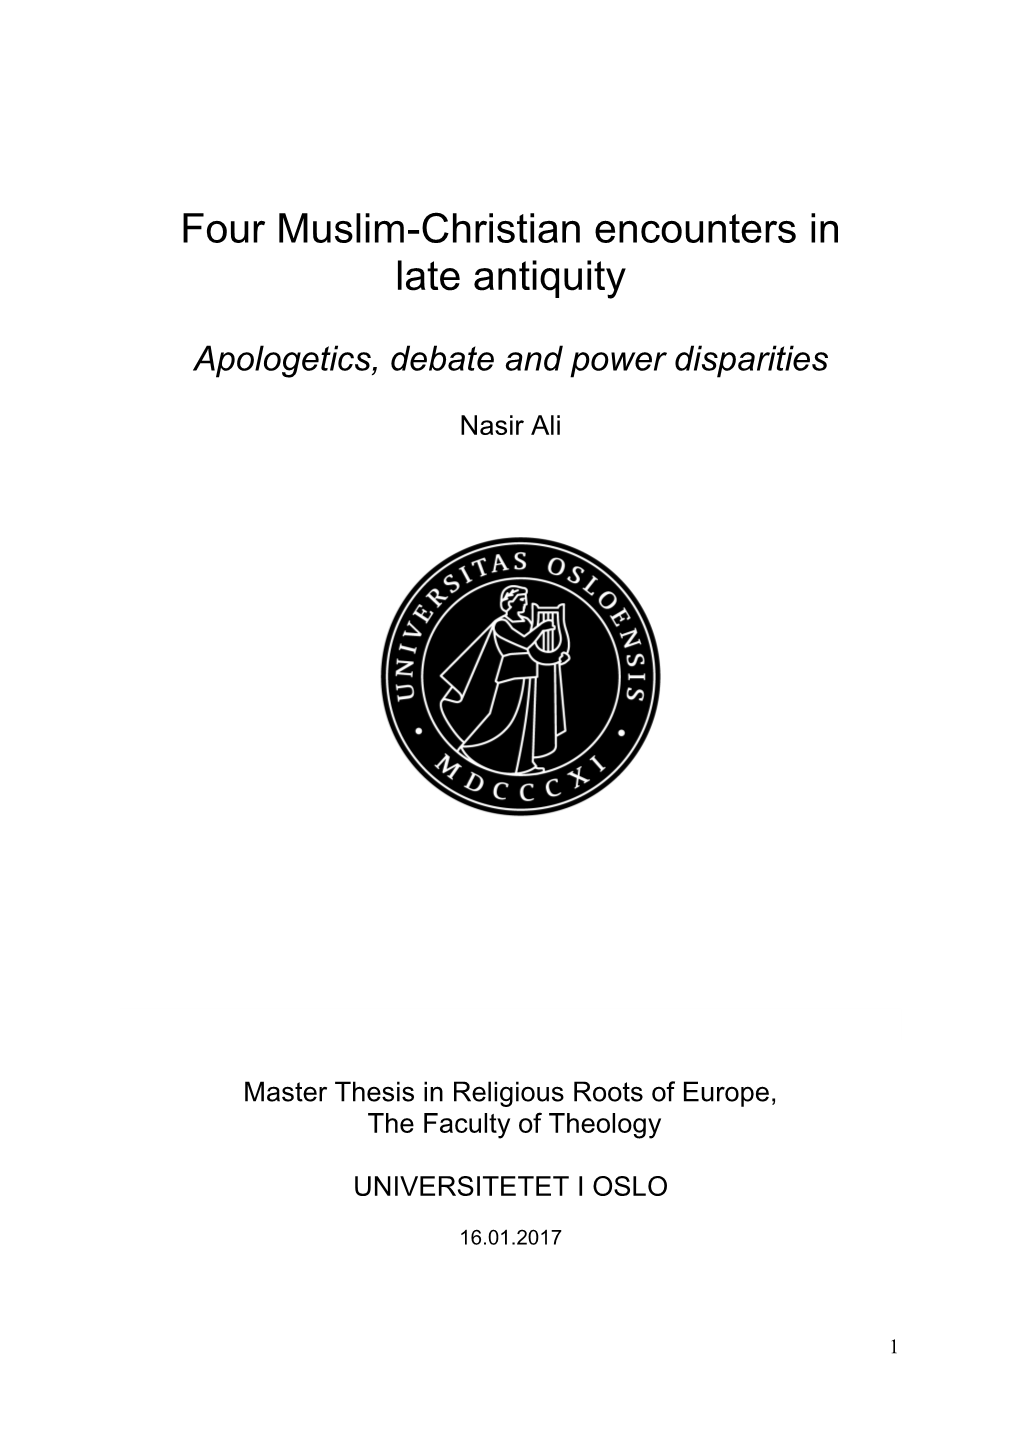 Four Muslim-Christian Encounters in Late Antiquity